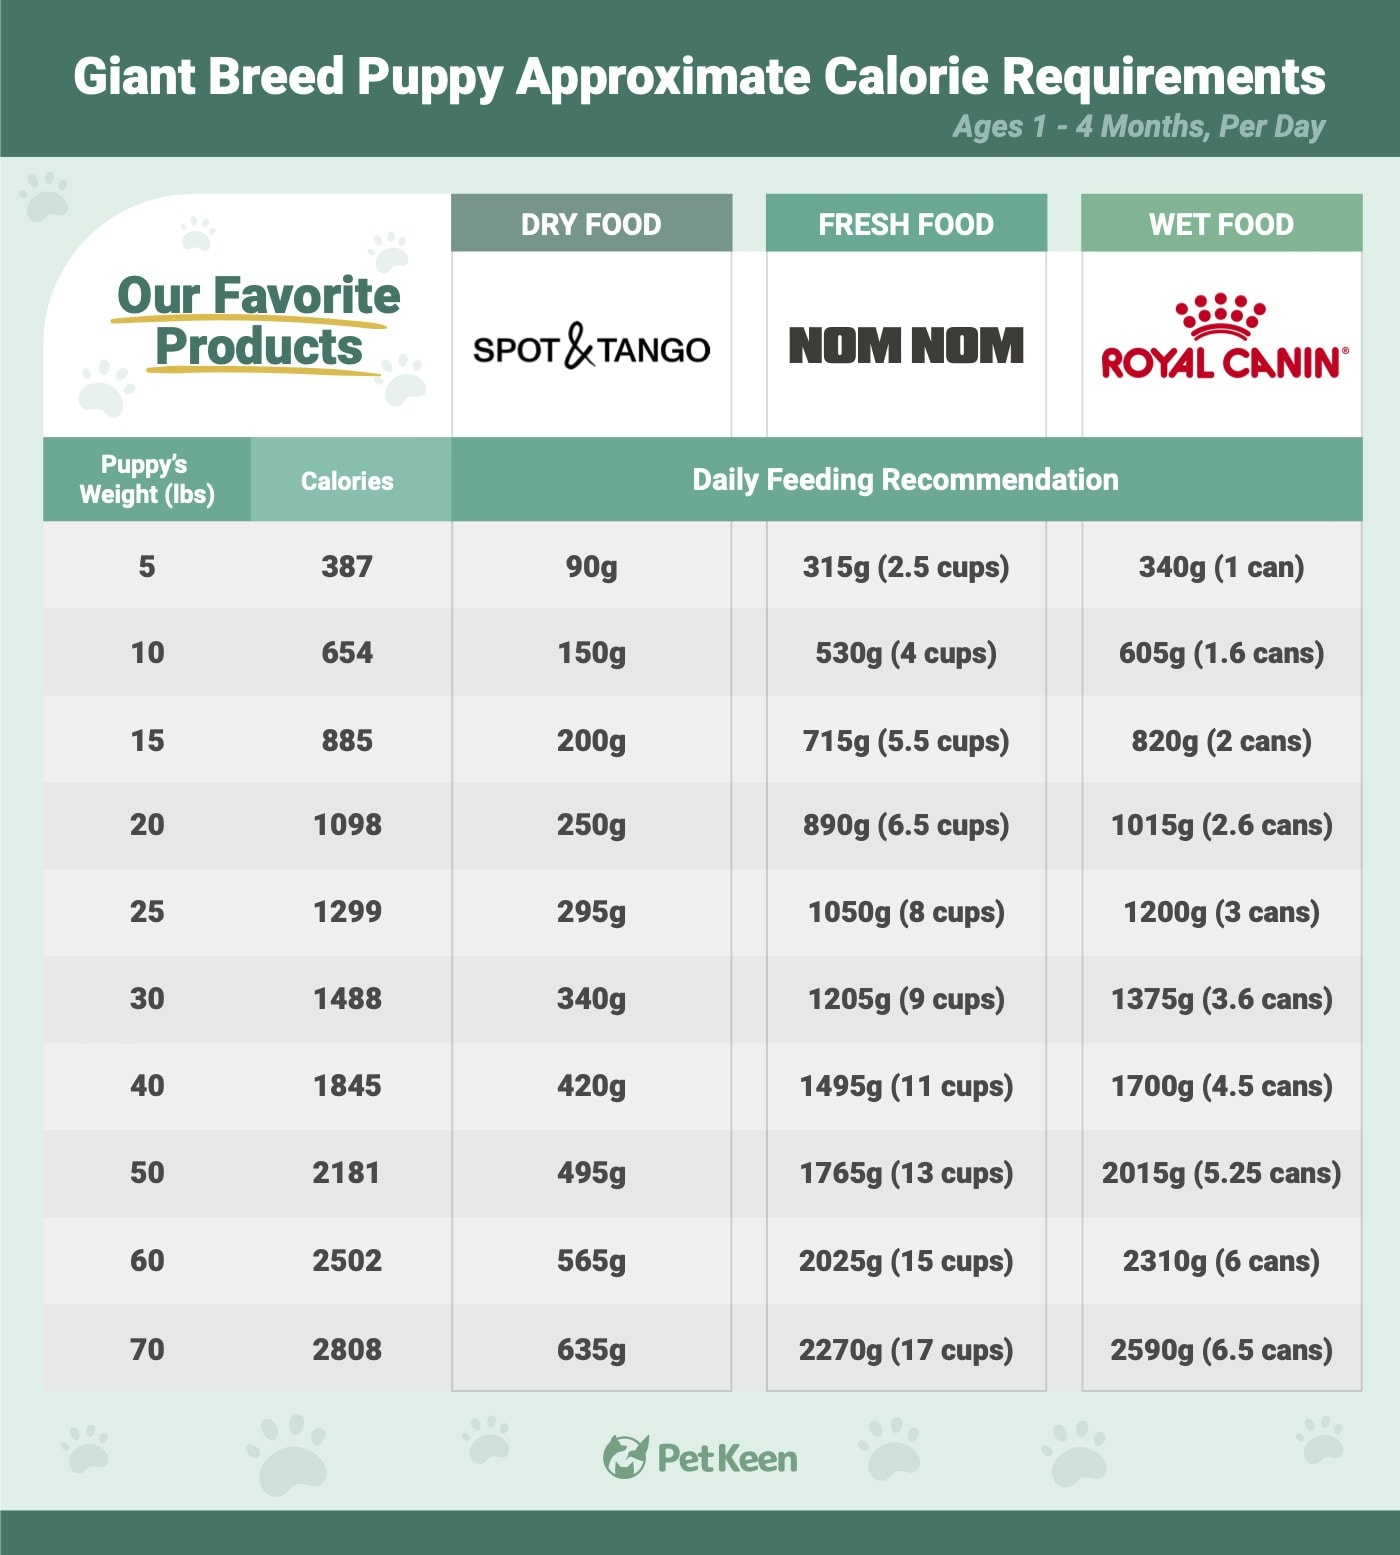 Giant dog breed calorie requirements